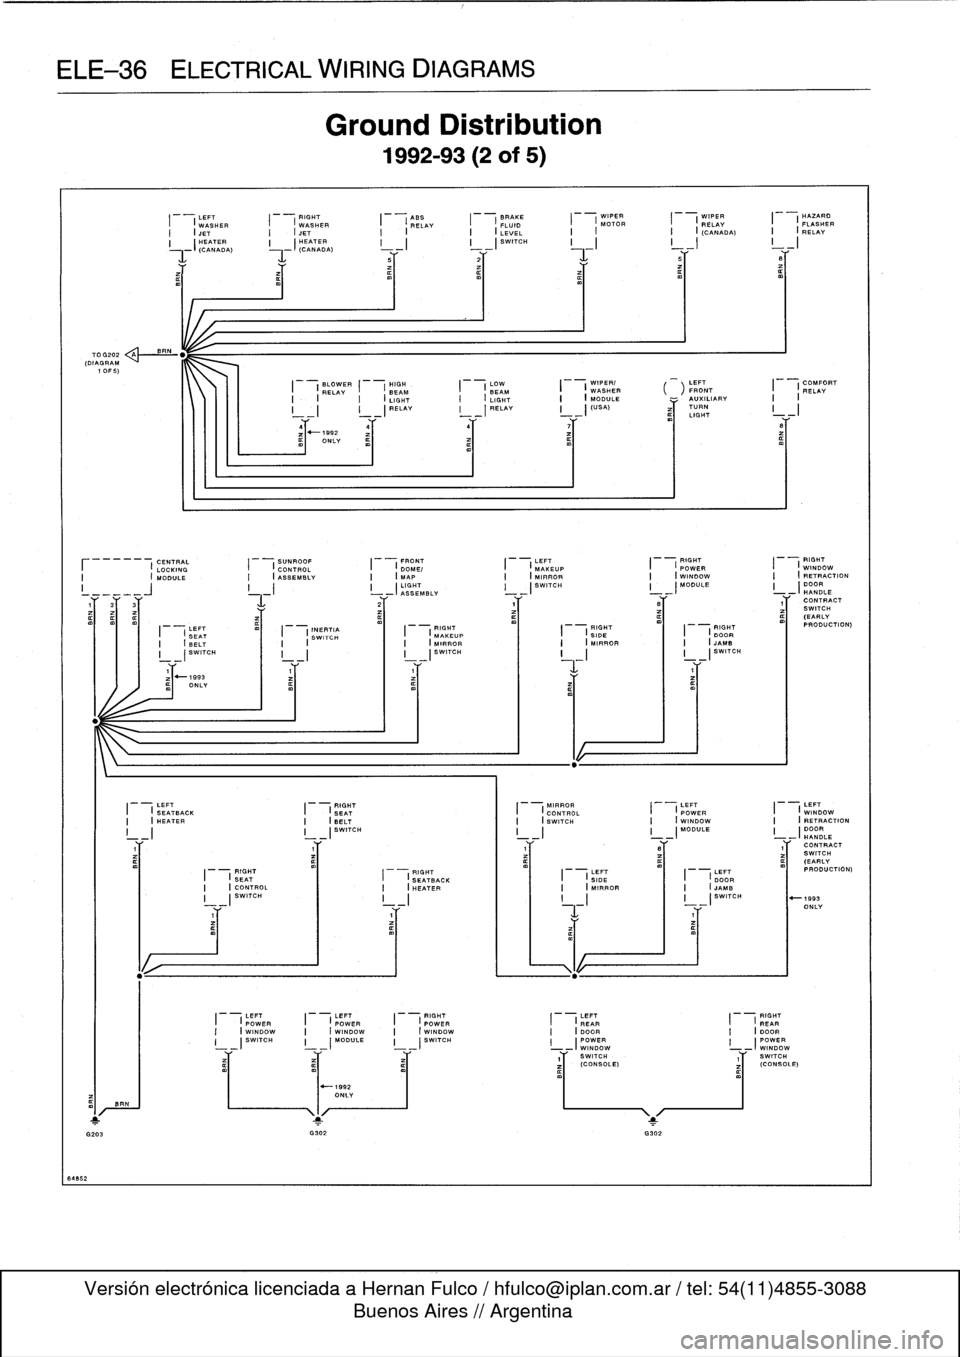 BMW 328i 1998 E36 User Guide 
ELE-36
ELECTRICAL
WIRING
DIAGRAMS

64852

70G202
(DIAGRAM
1
OF
5)

BR

BRN

LEFT

	

RIGHT

	

ASS

	

BRAKE

	

WIPER

	

WIPER

	

HAZARD
I

	

(
WASHER

	

I

	

(
WASHER

	

I

	

(
RELAY

	

I

